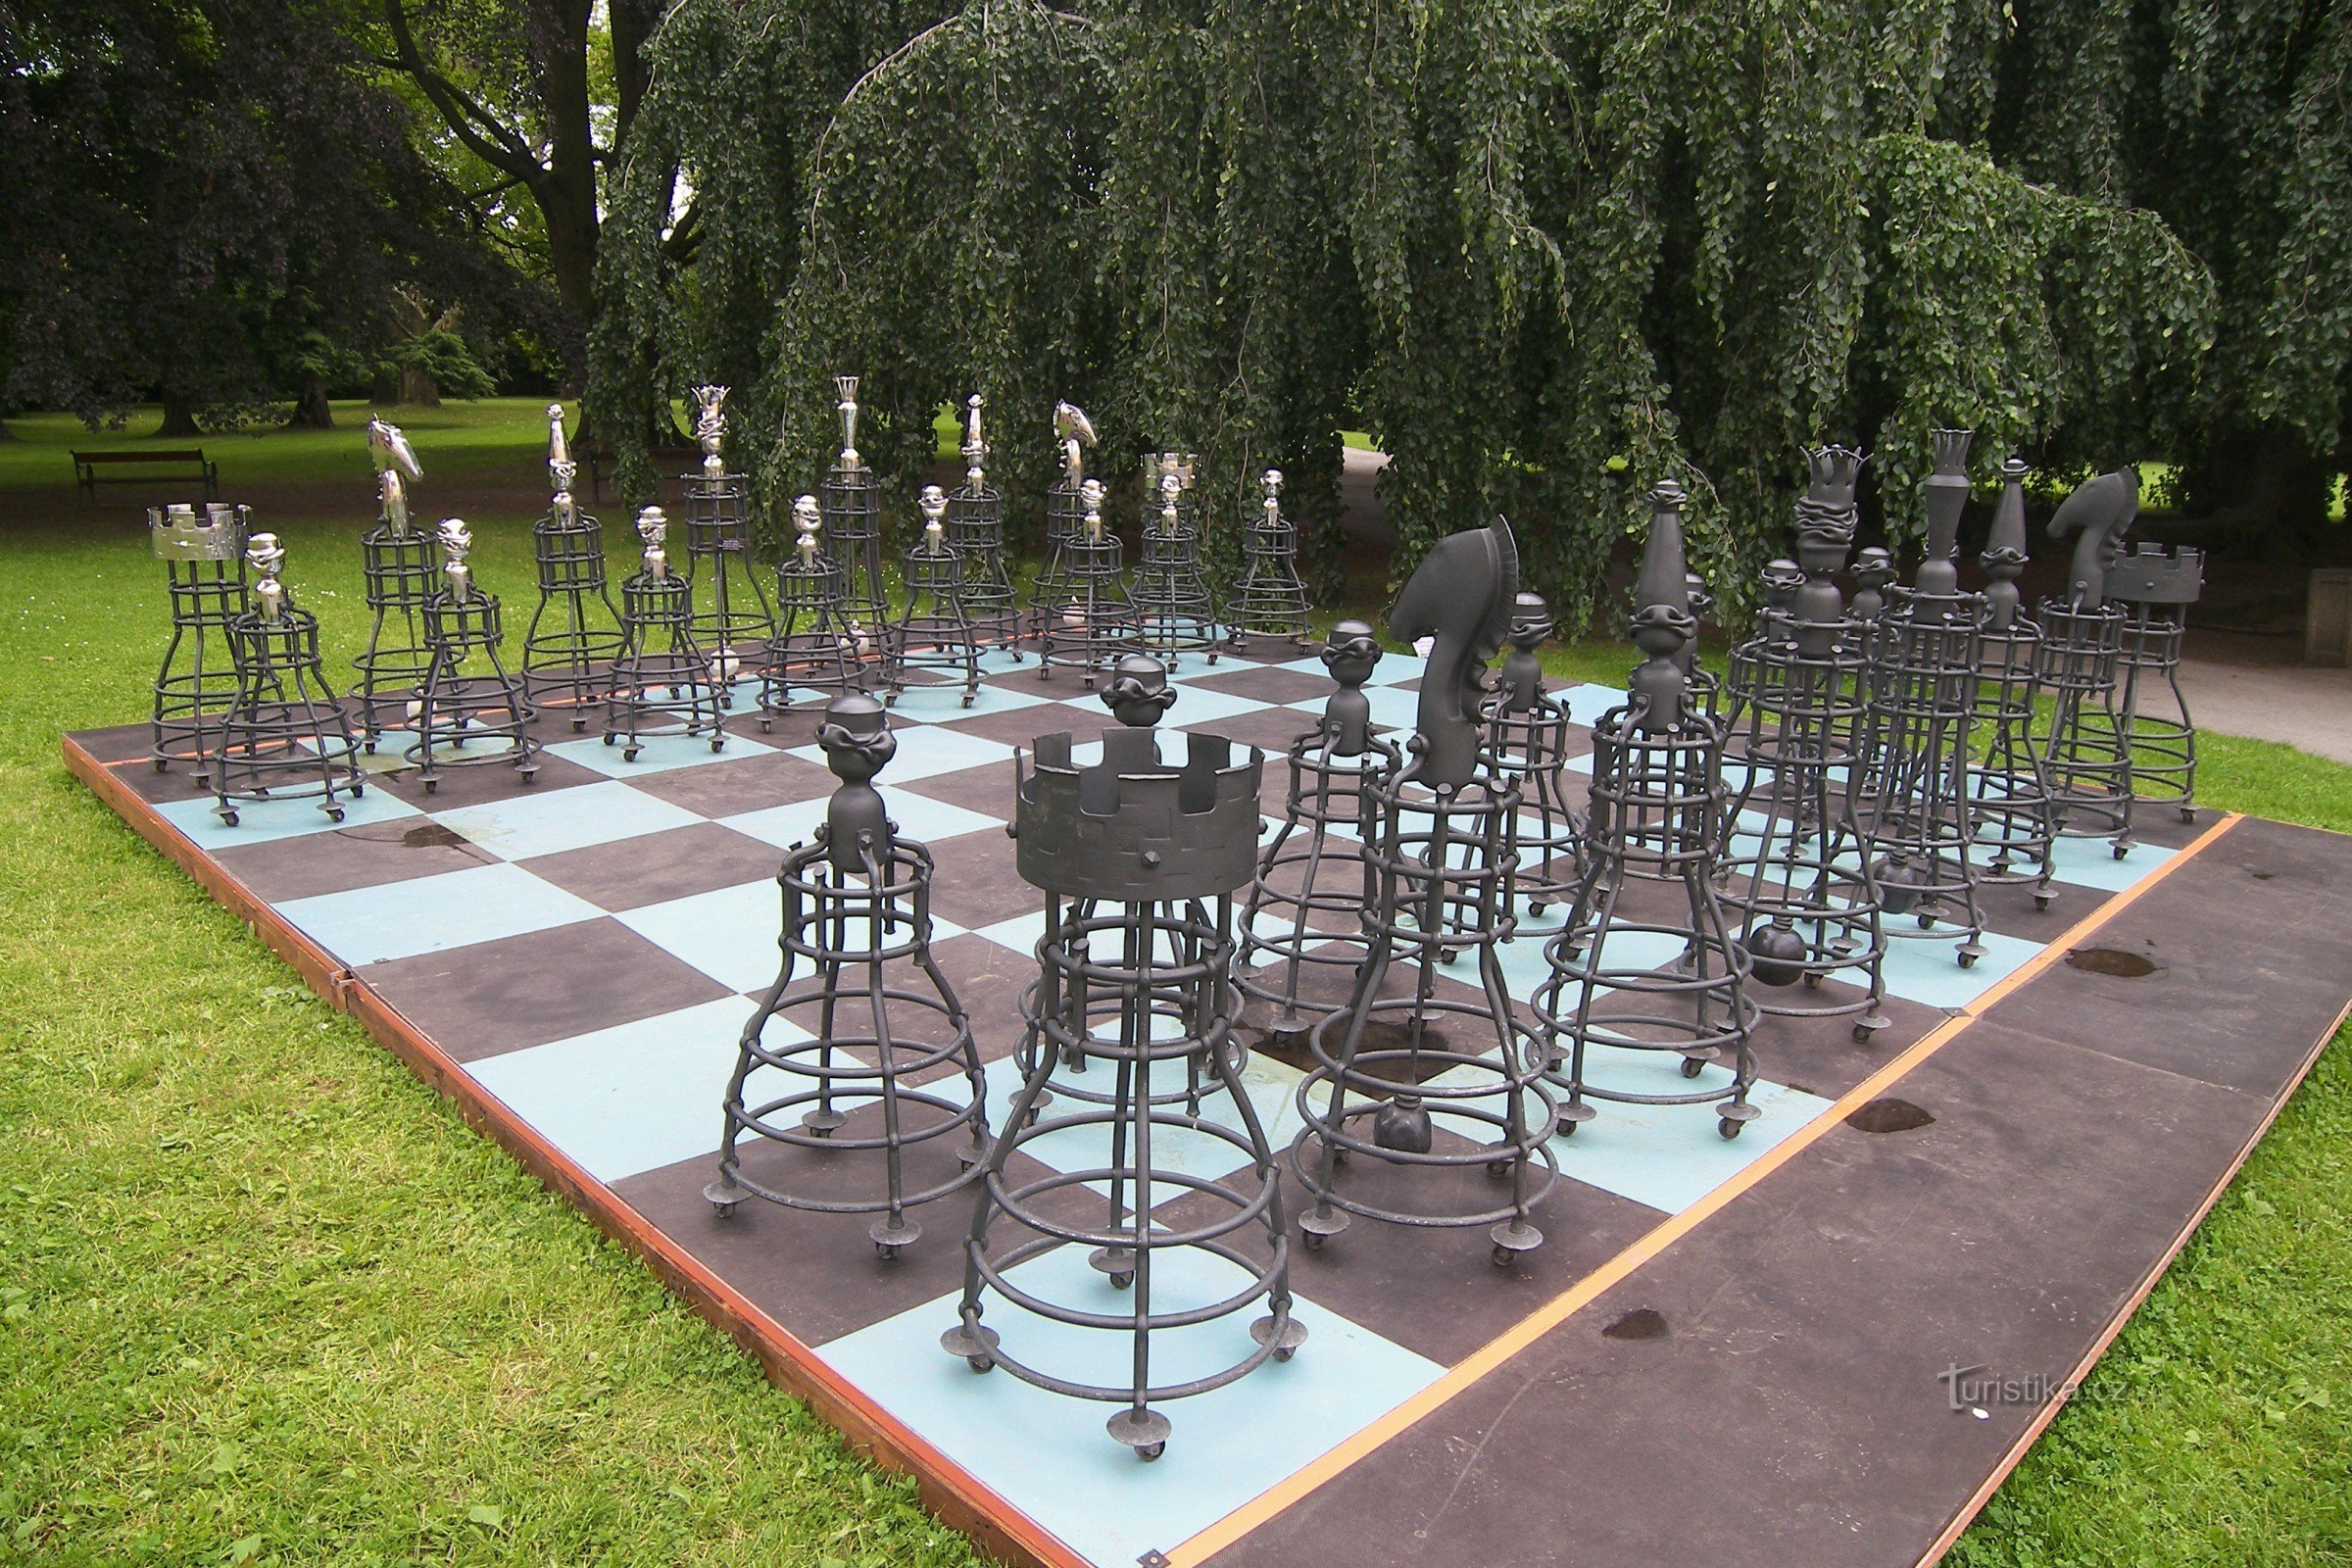 NOT. FORGED CHESS IN THE CZECH REPUBLIC